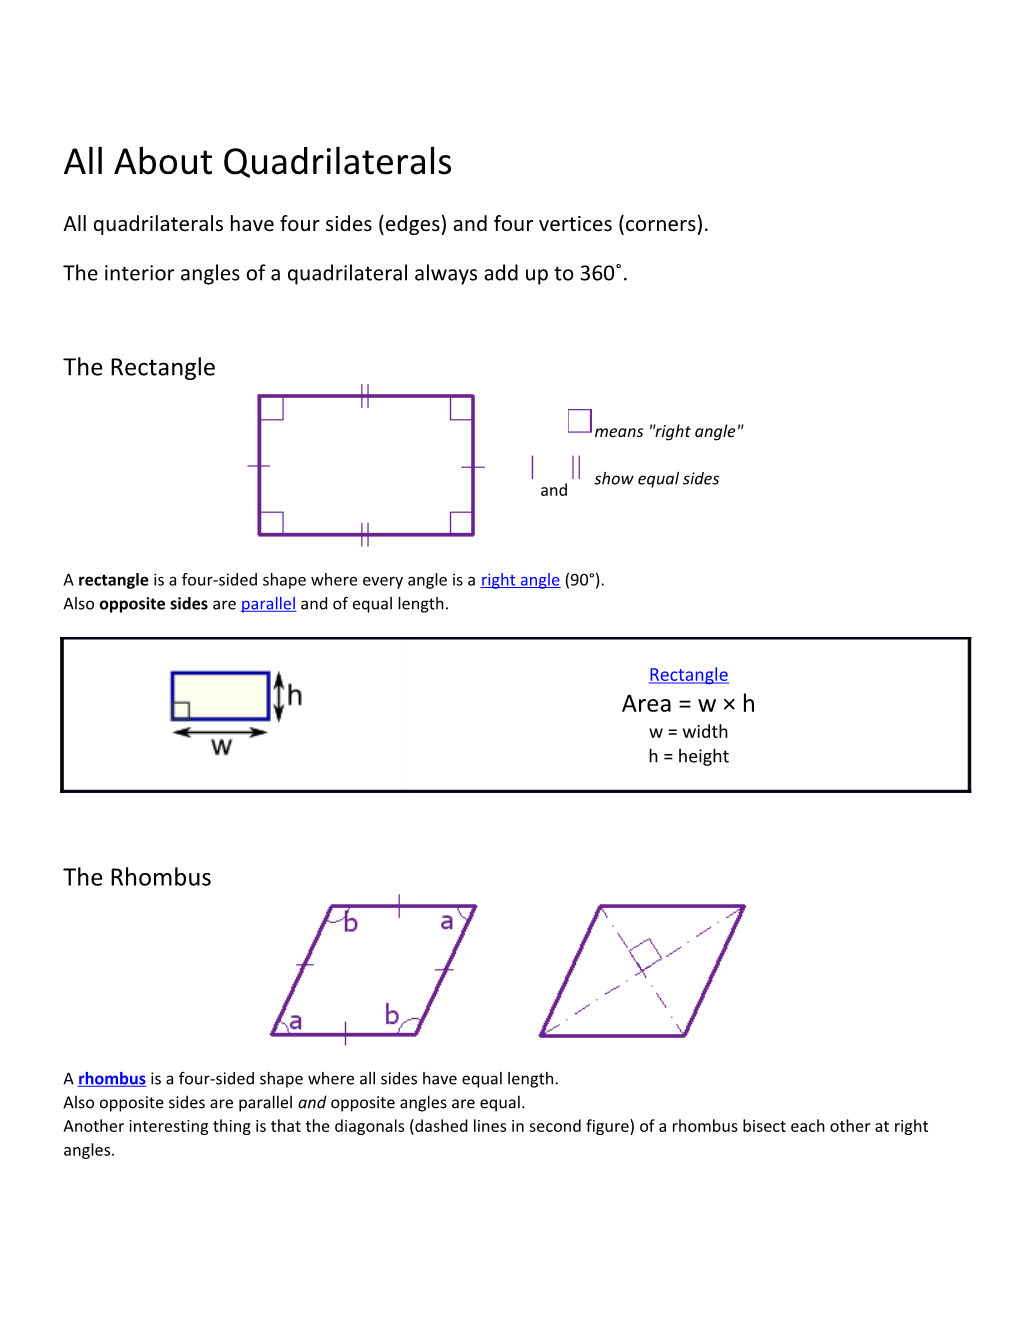 All Quadrilaterals Have Four Sides (Edges) and Four Vertices (Corners)